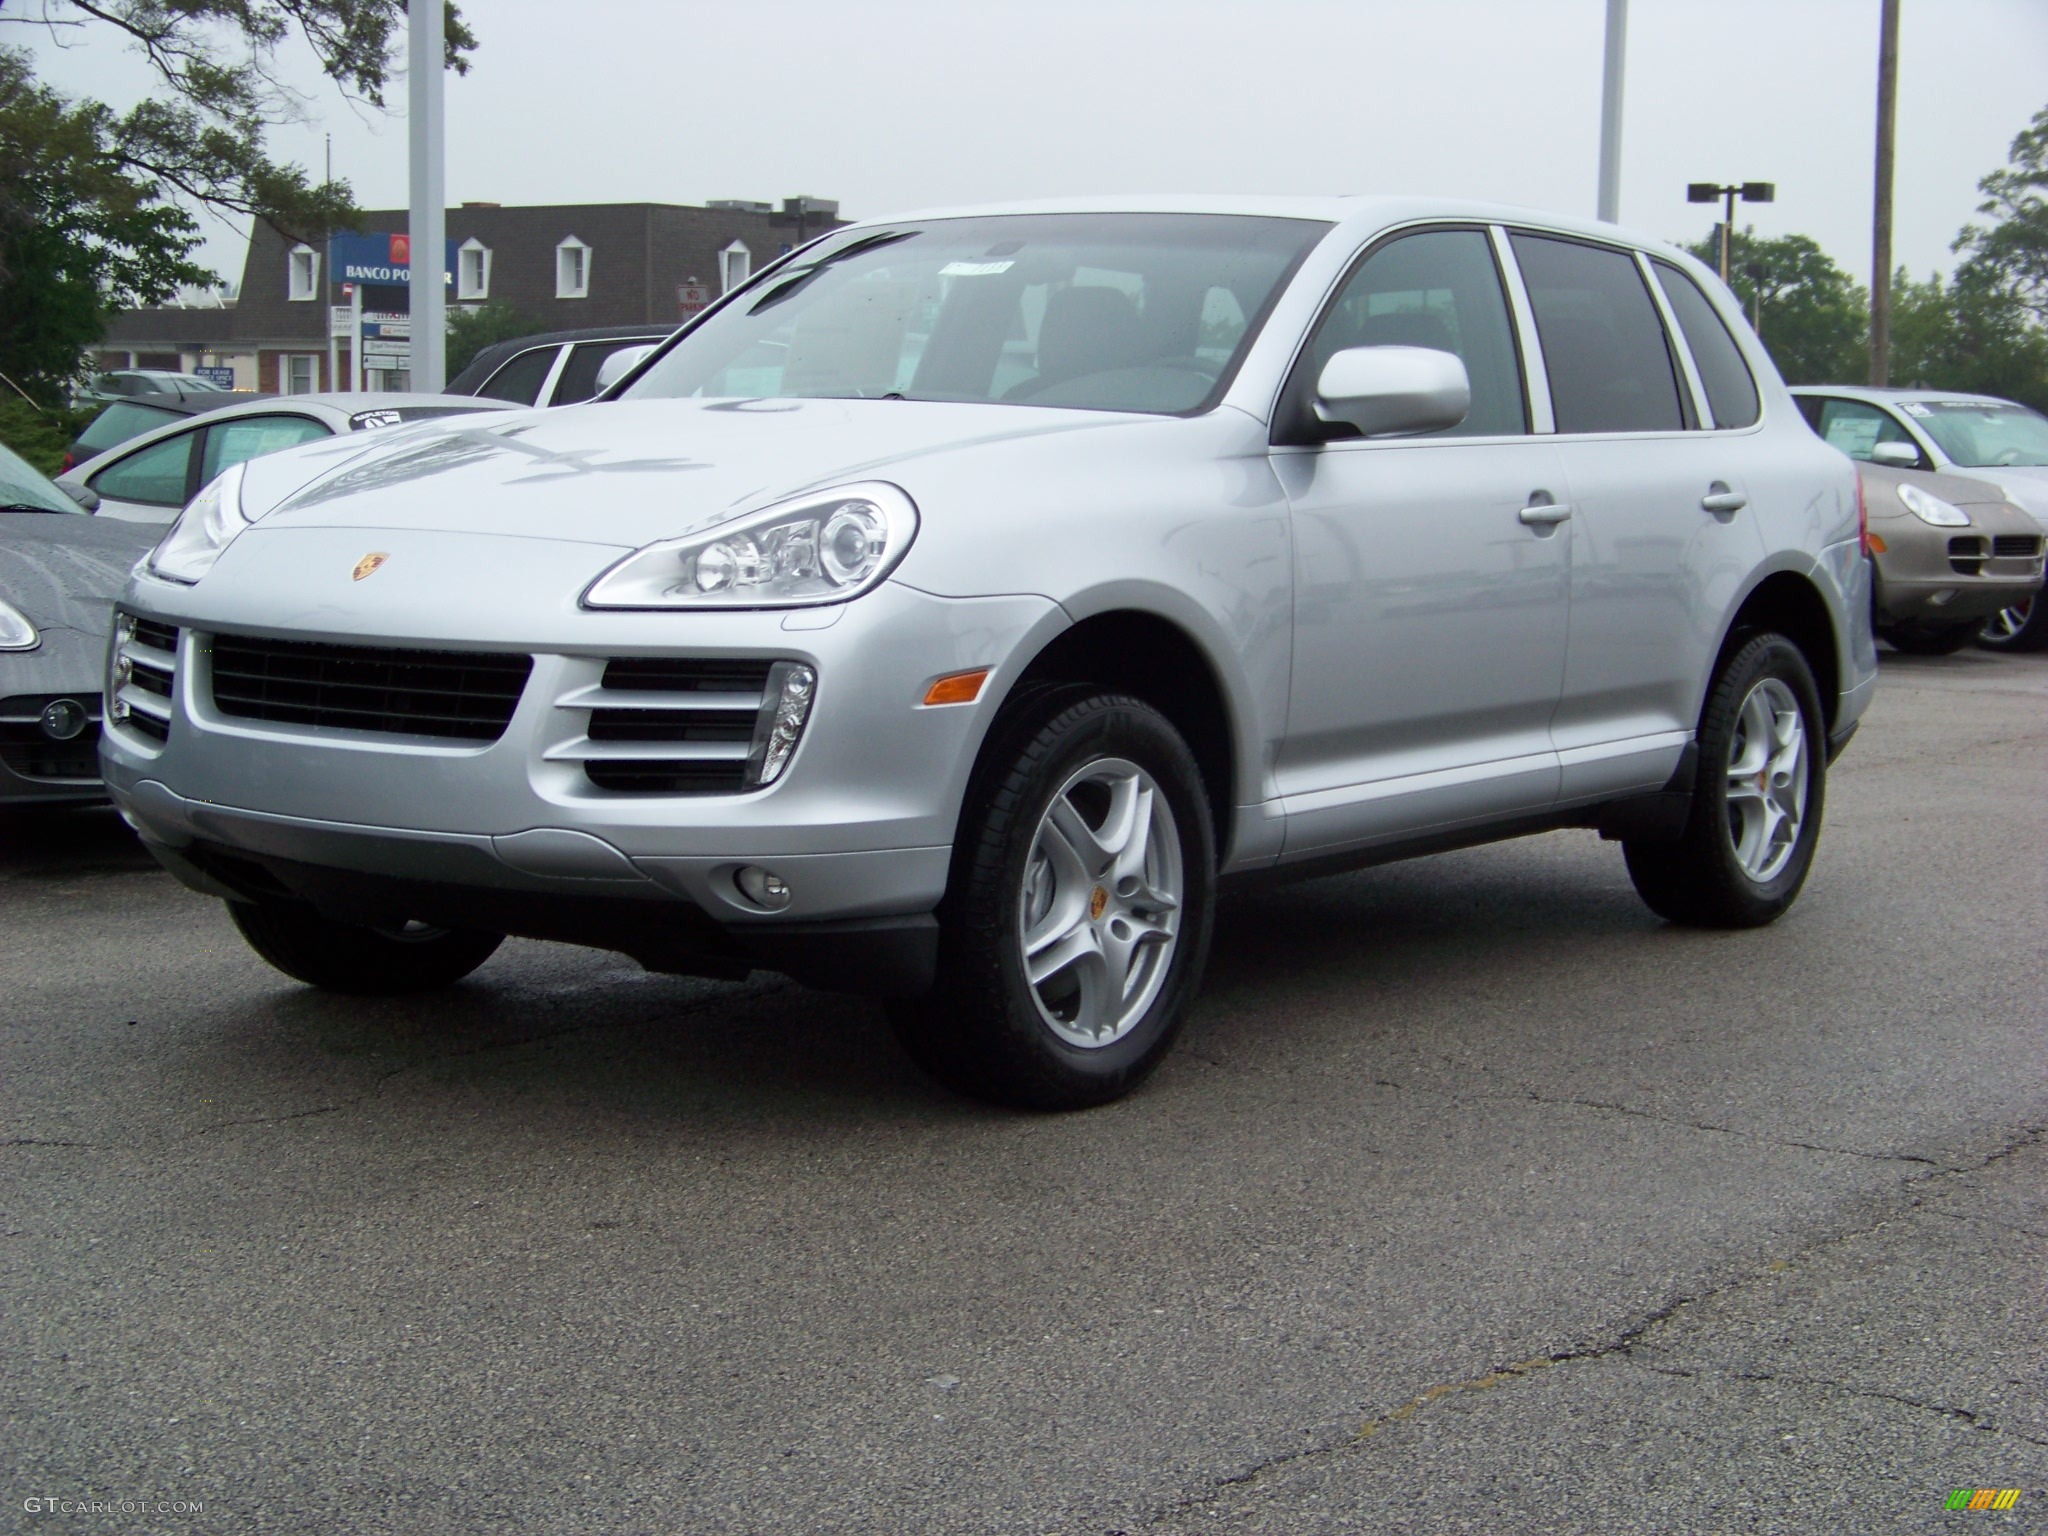 2009 Cayenne S - Crystal Silver Metallic / Black Full Leather photo #1